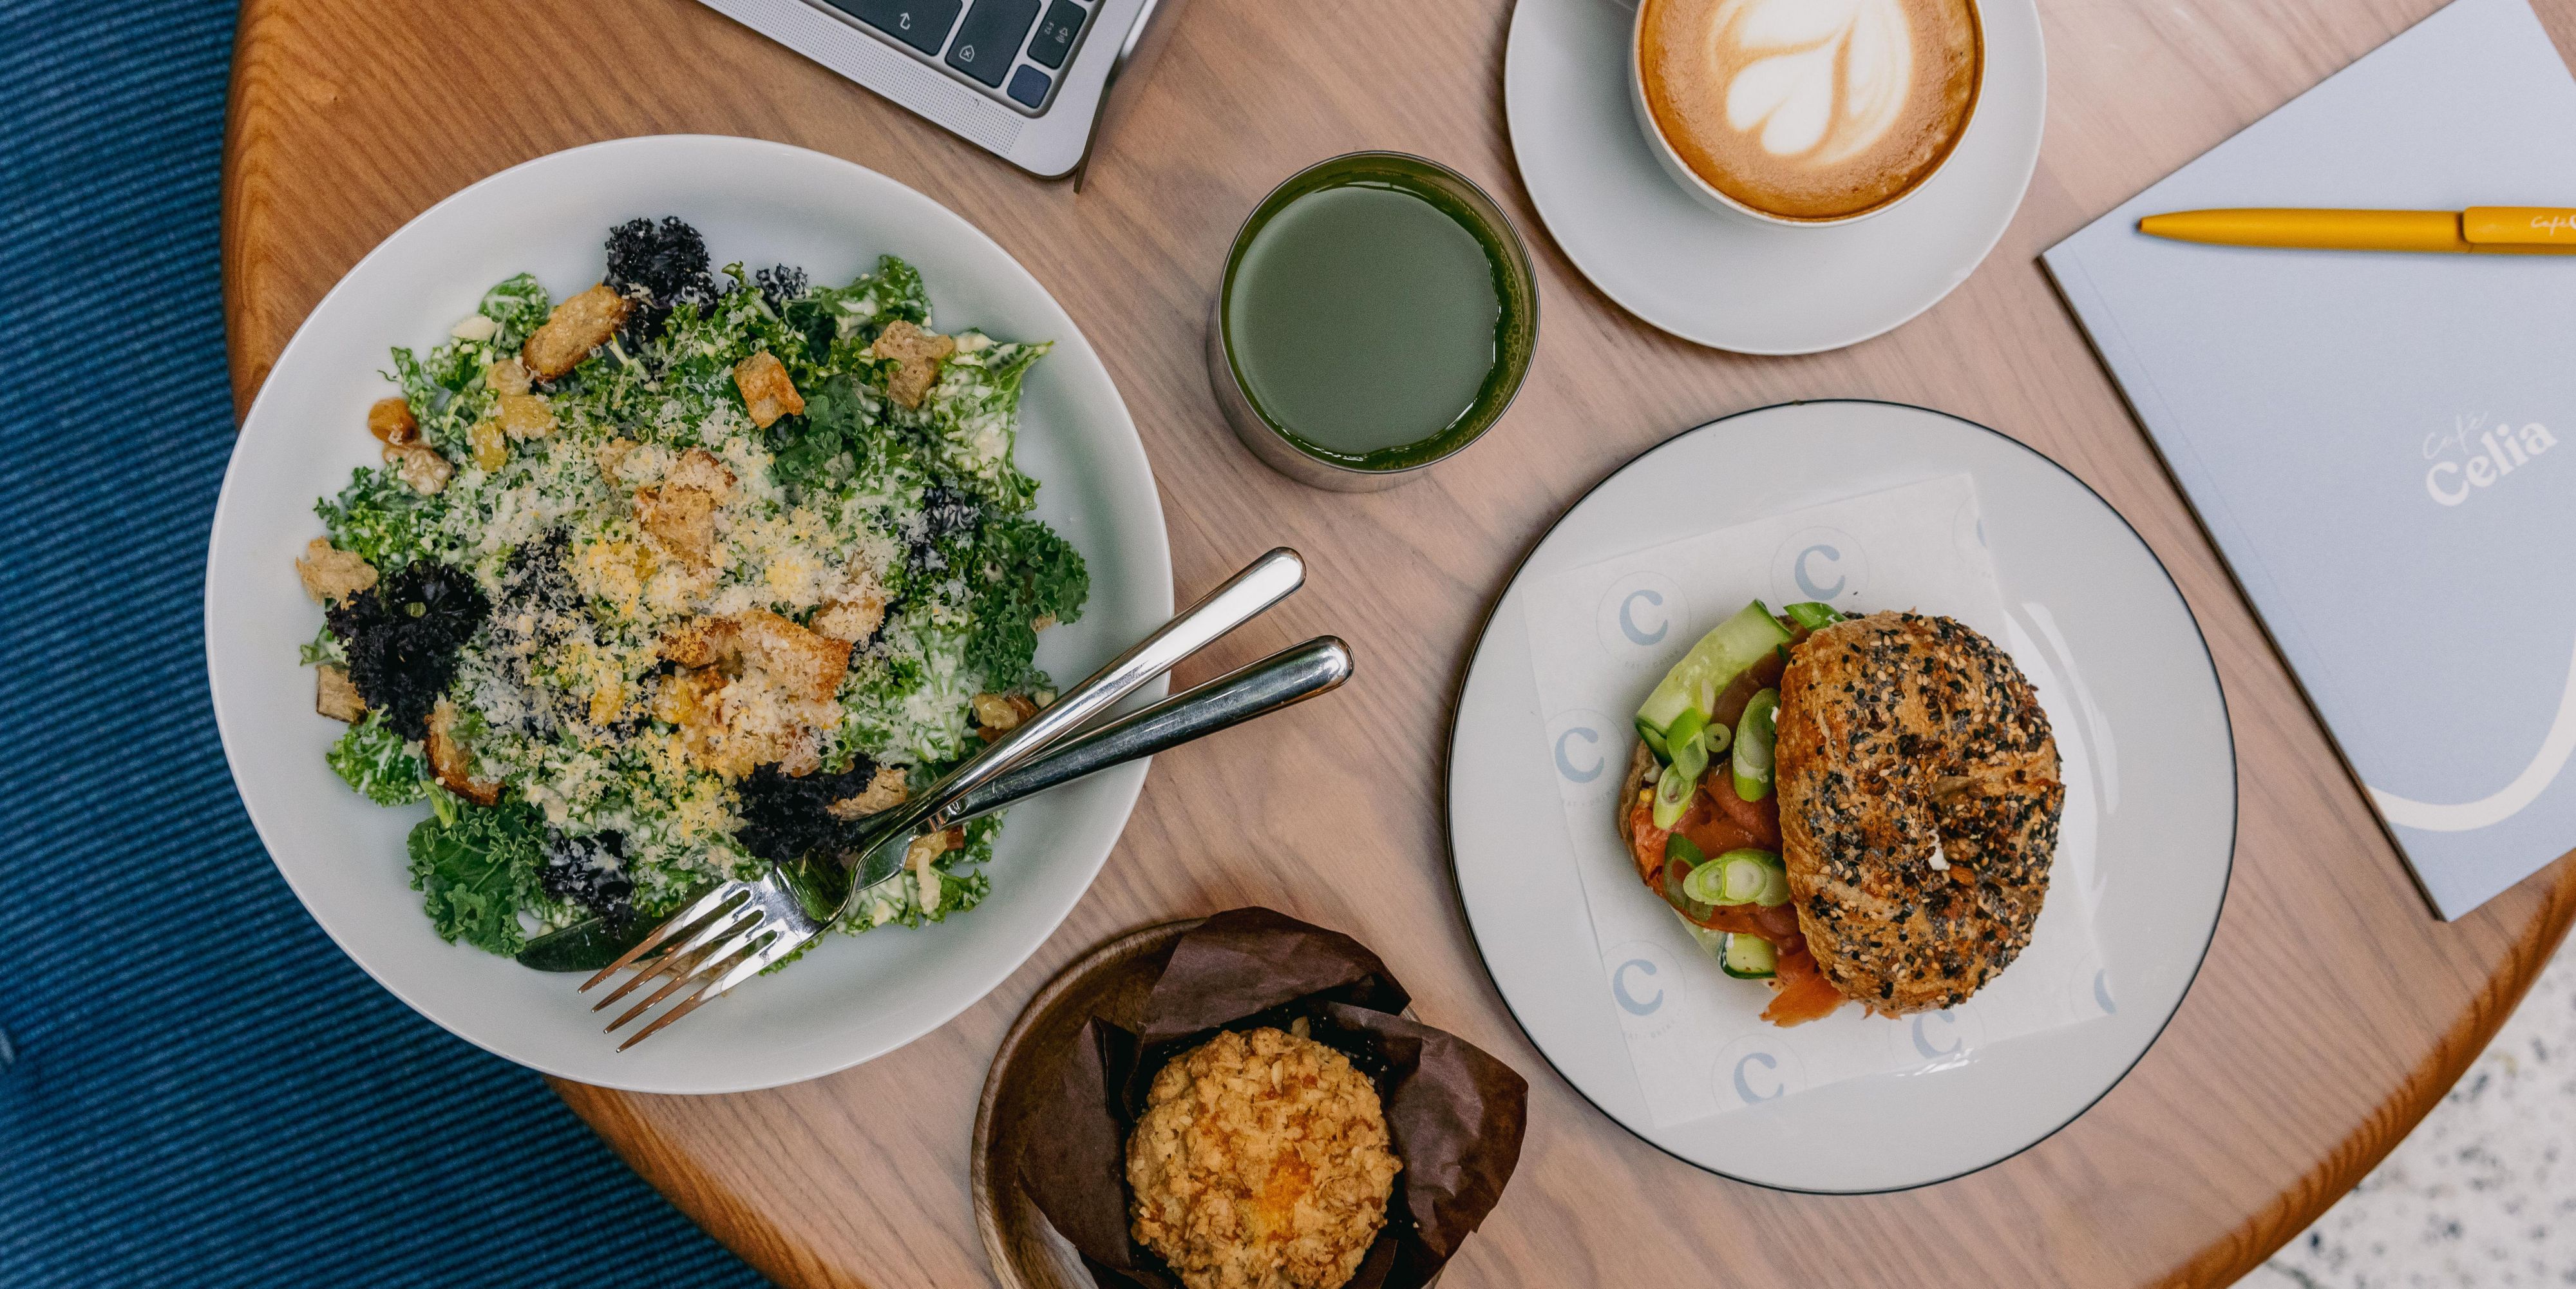 Café Celia is a place for great coffee and coworking. Our soft, though vibrant vibe is in good company with forward thinking ‘playful’ foods & drinks, plus friendly service. This is a place where you can recharge. Your laptop or yourself. You choose.